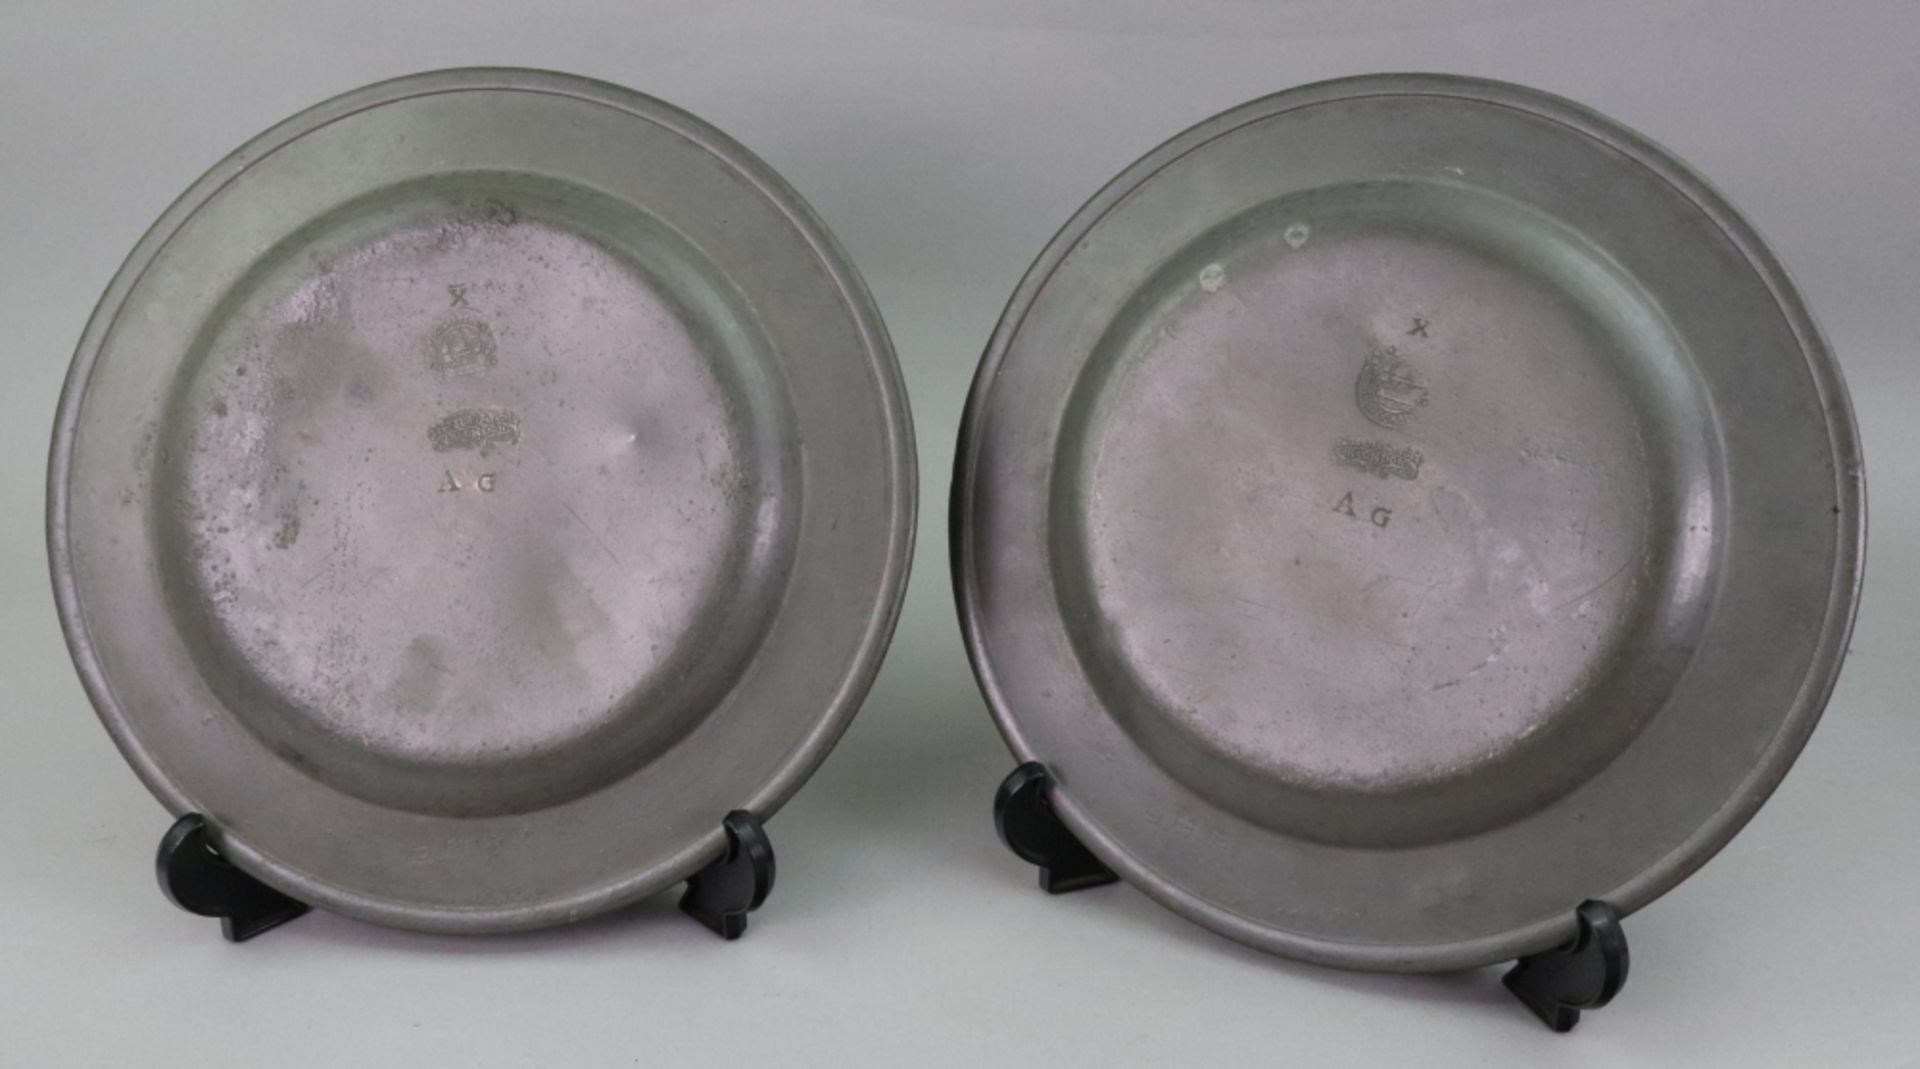 A set of three English pewter dinner plates, 18th century, touch marks of John Tidmarsh, London, 23. - Image 3 of 3